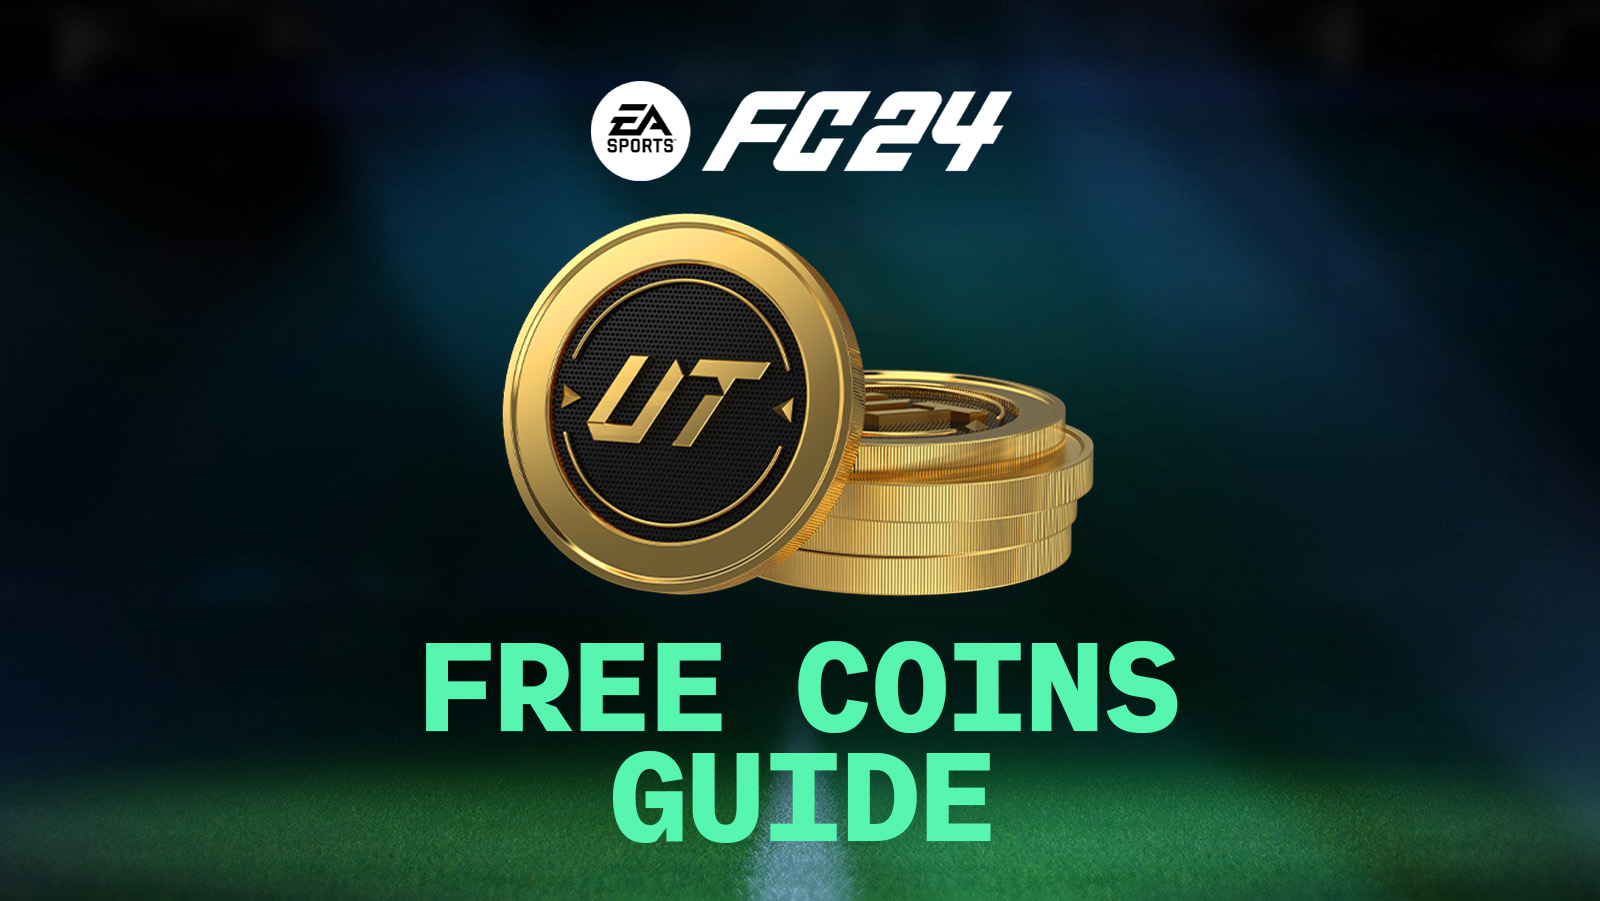 How to Get Free Coins in FC 24